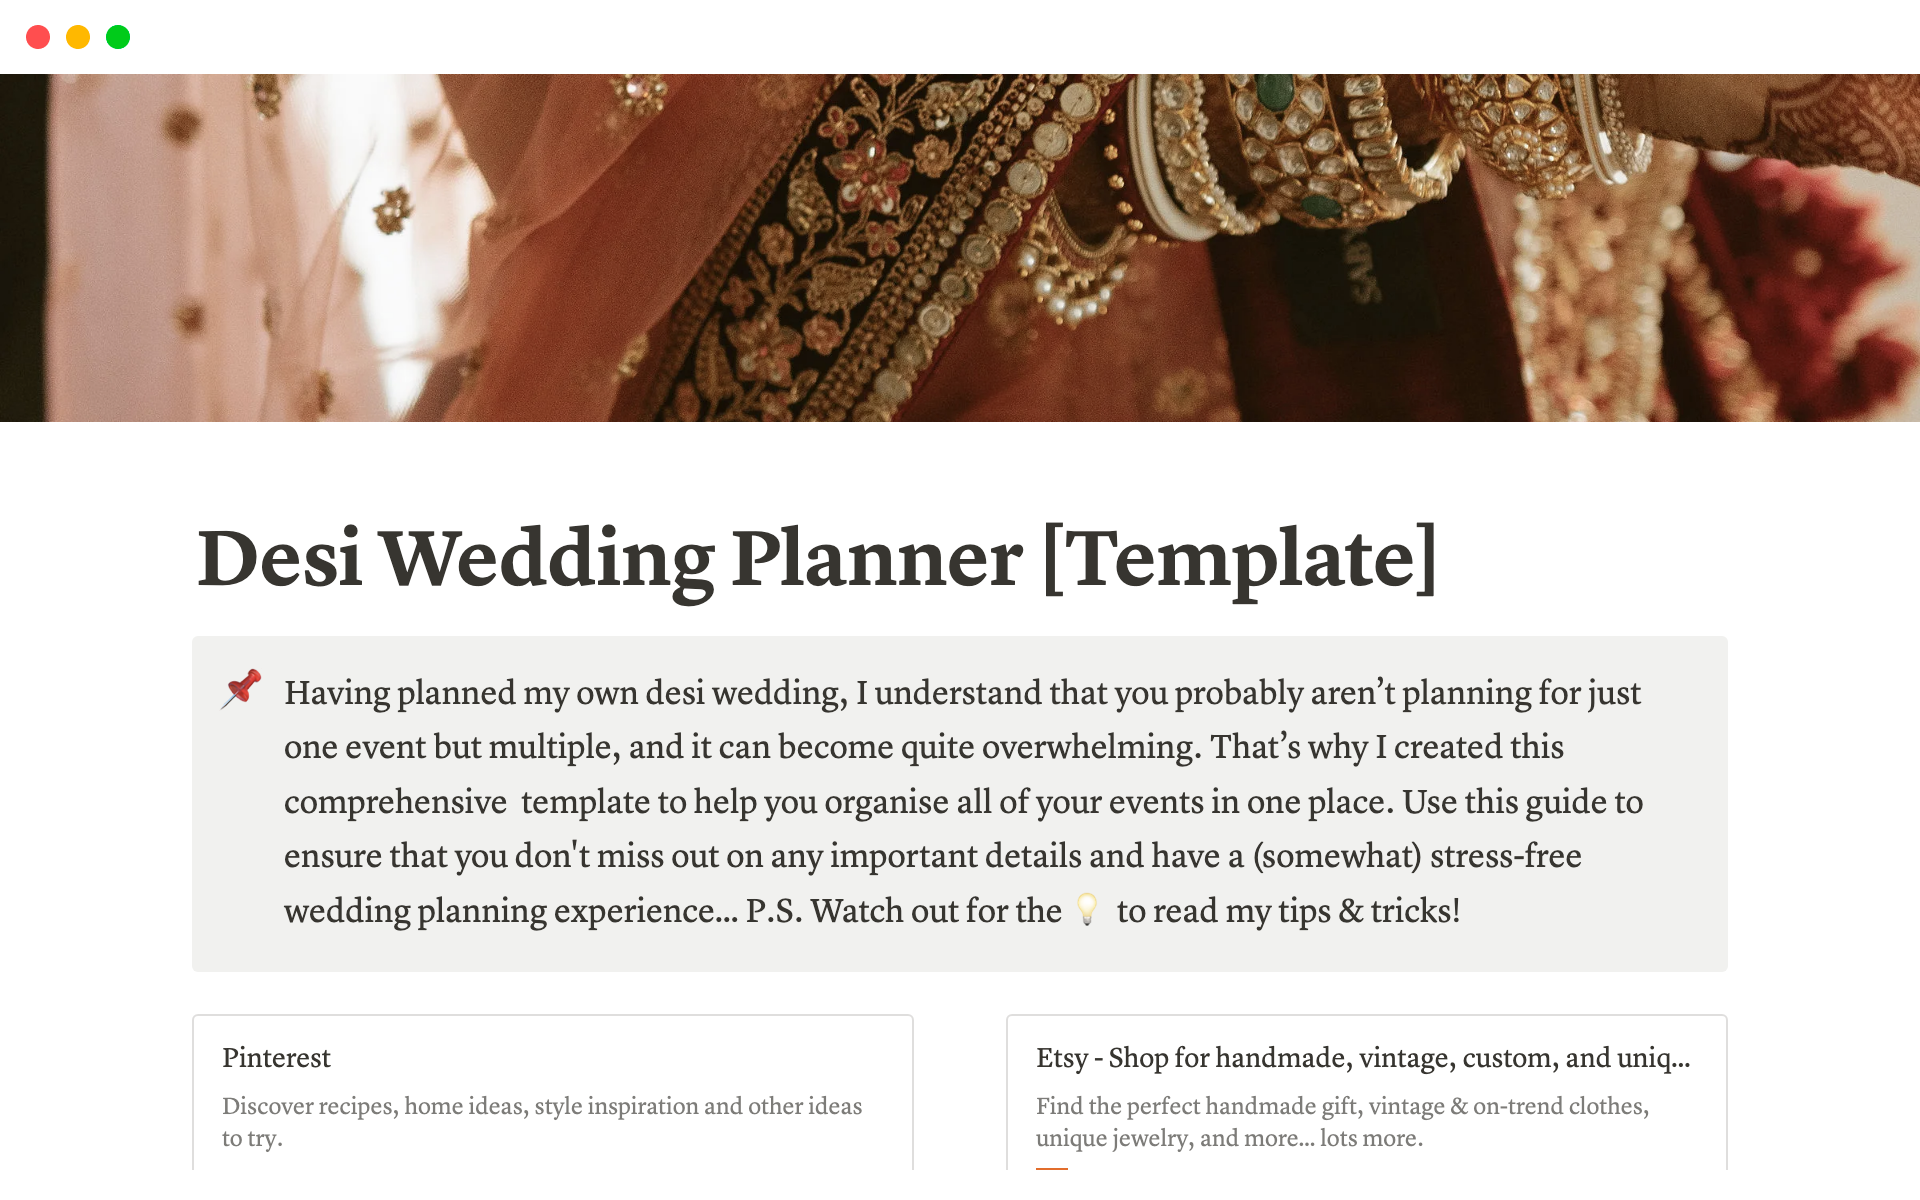 The Desi Wedding Planner is designed to streamline the planning process behind all of your events and allow you to create lifelong memories without the added stress.